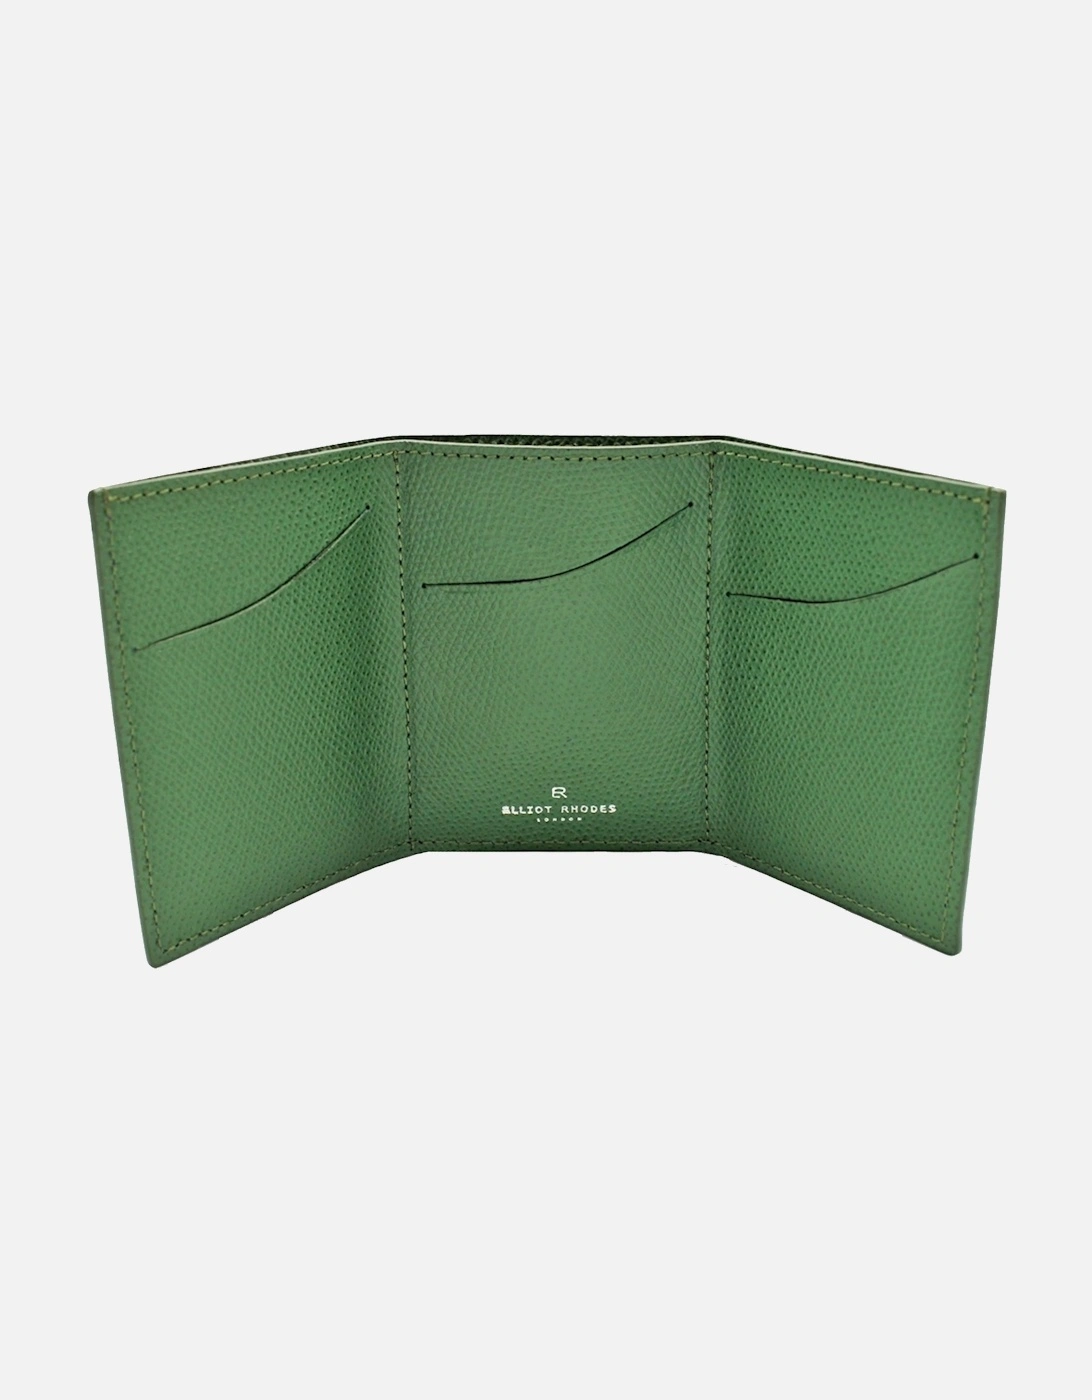 Dauphin Trifold Credit Card Holder Forest